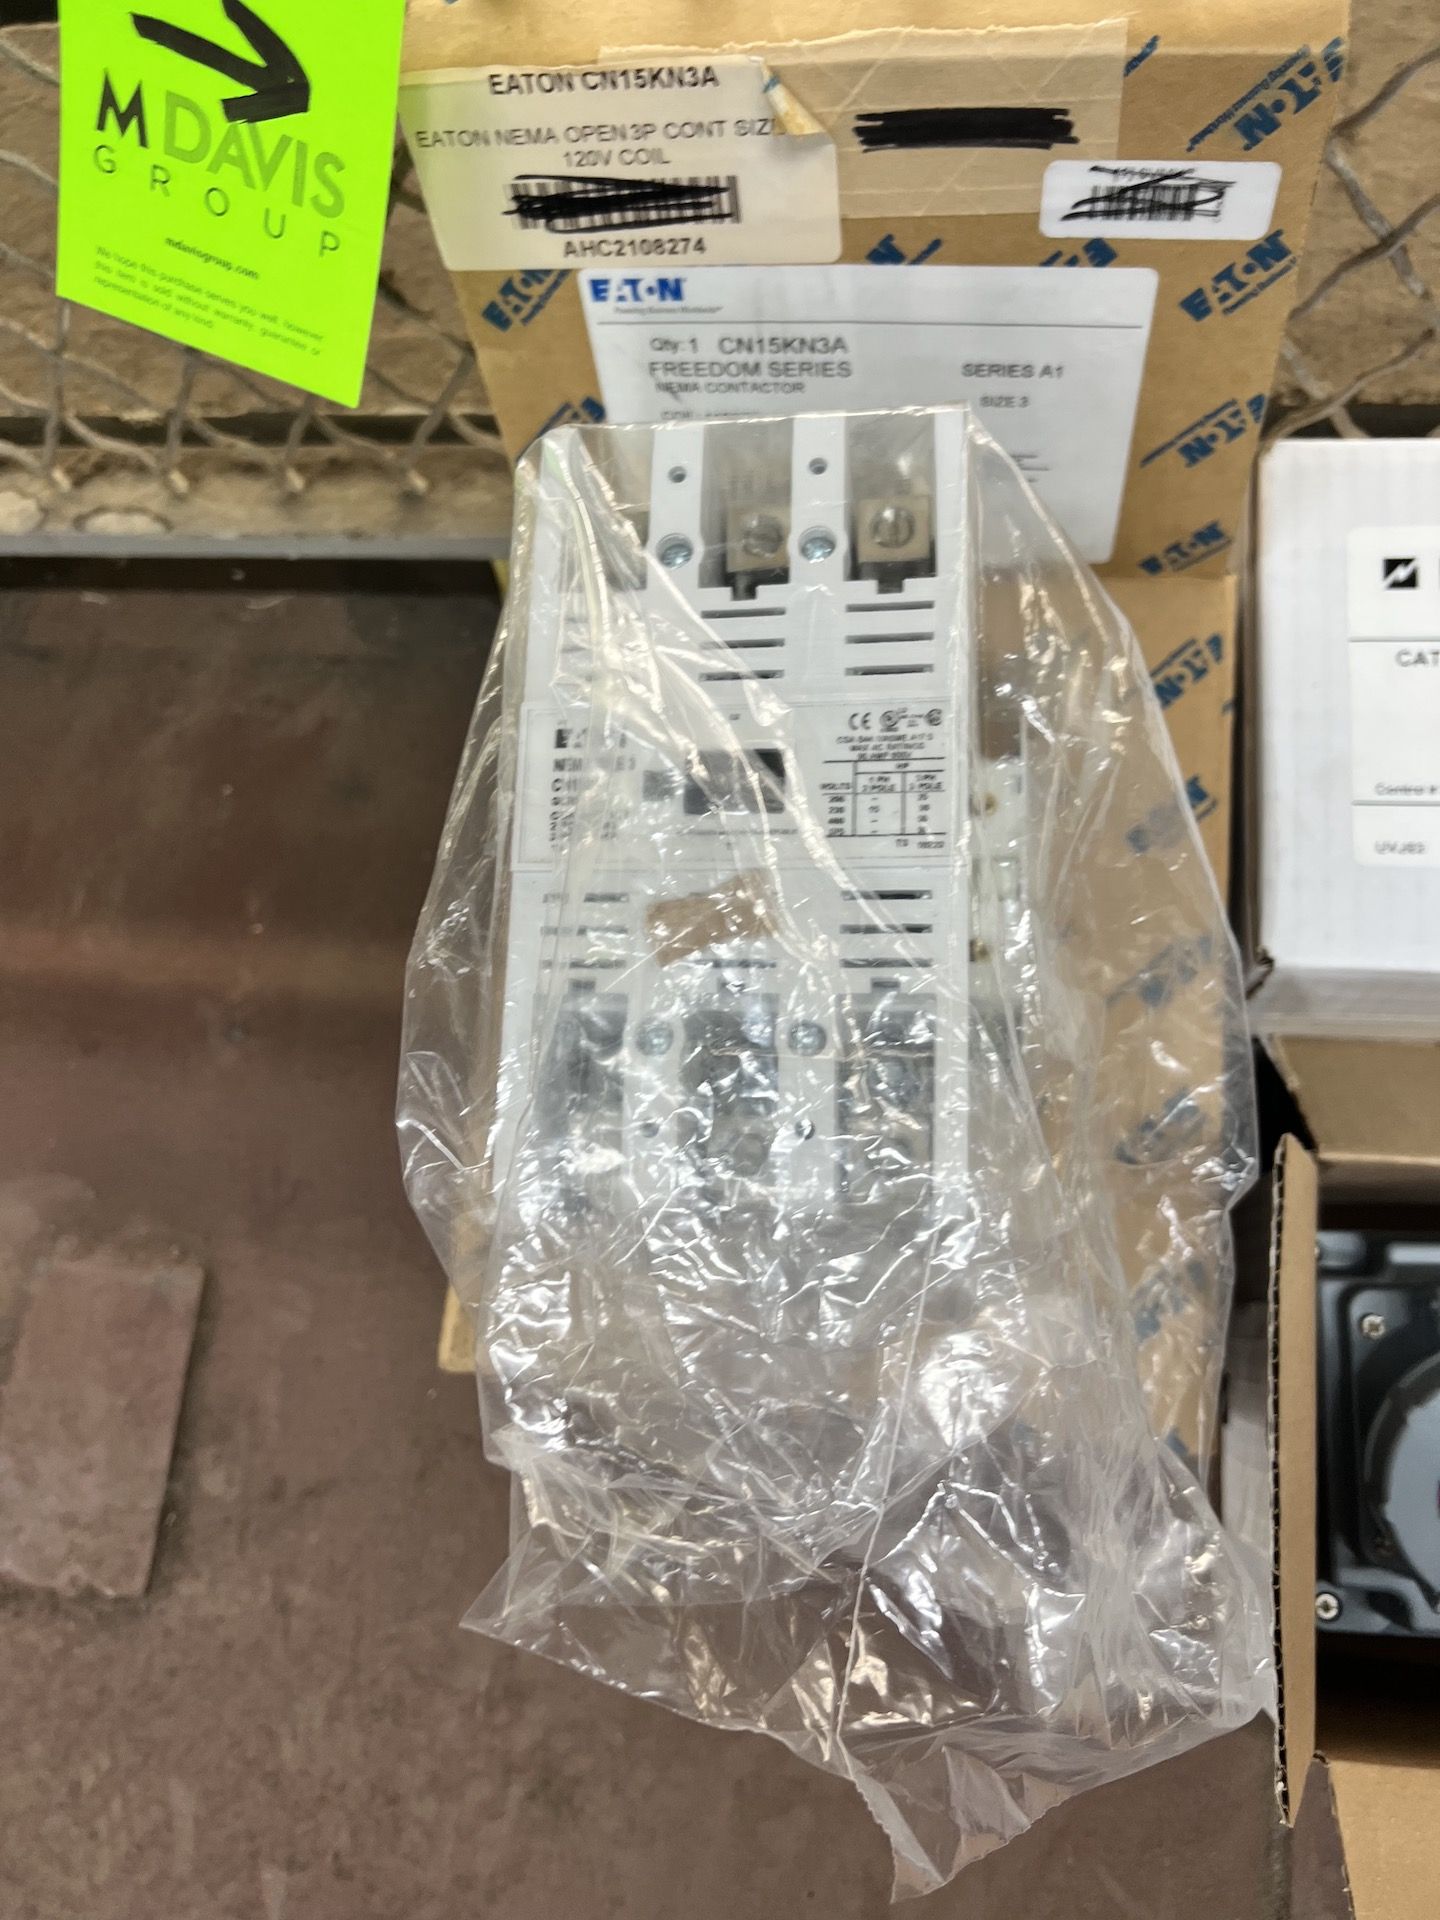 ASSORTED NEW EATON ELECTRICAL MRO, EATON AND MENNEKES, CONTACTORS, INTERLOCKED RECEPTABLES, AND MORE - Image 4 of 11